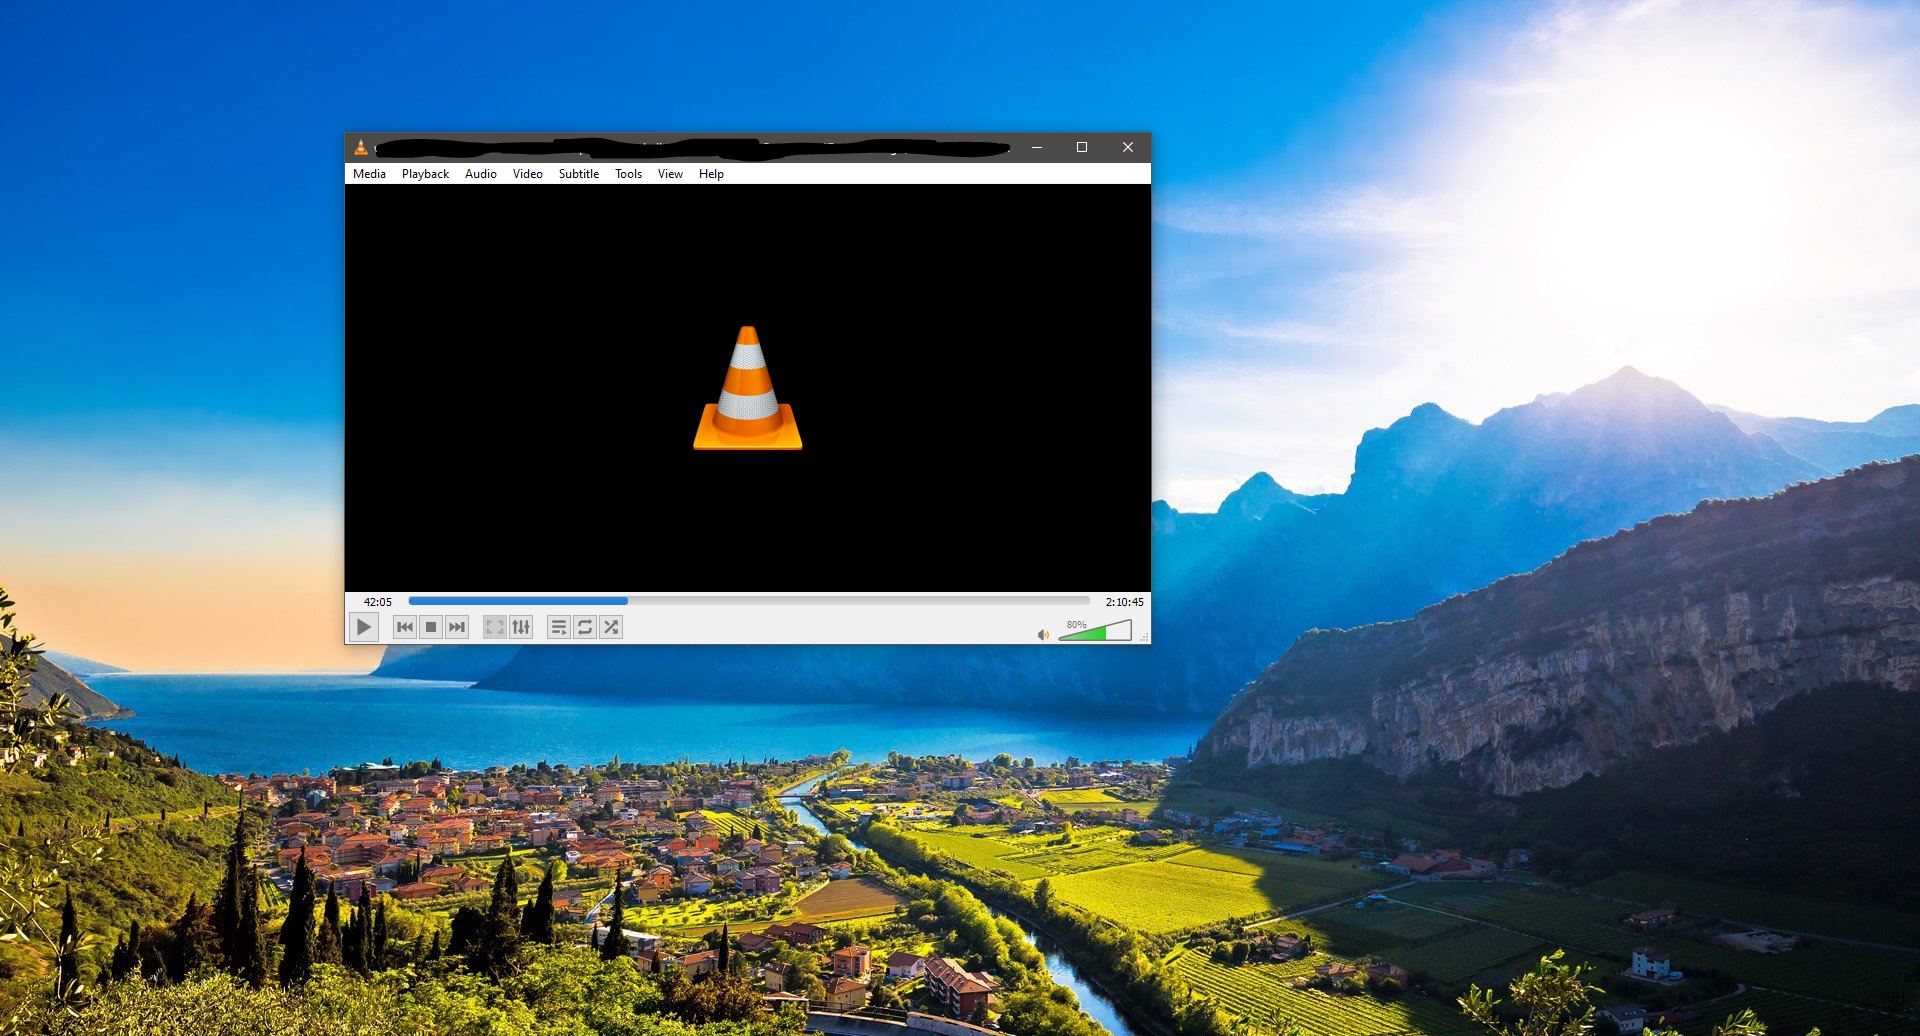 vlc media player only playing audio